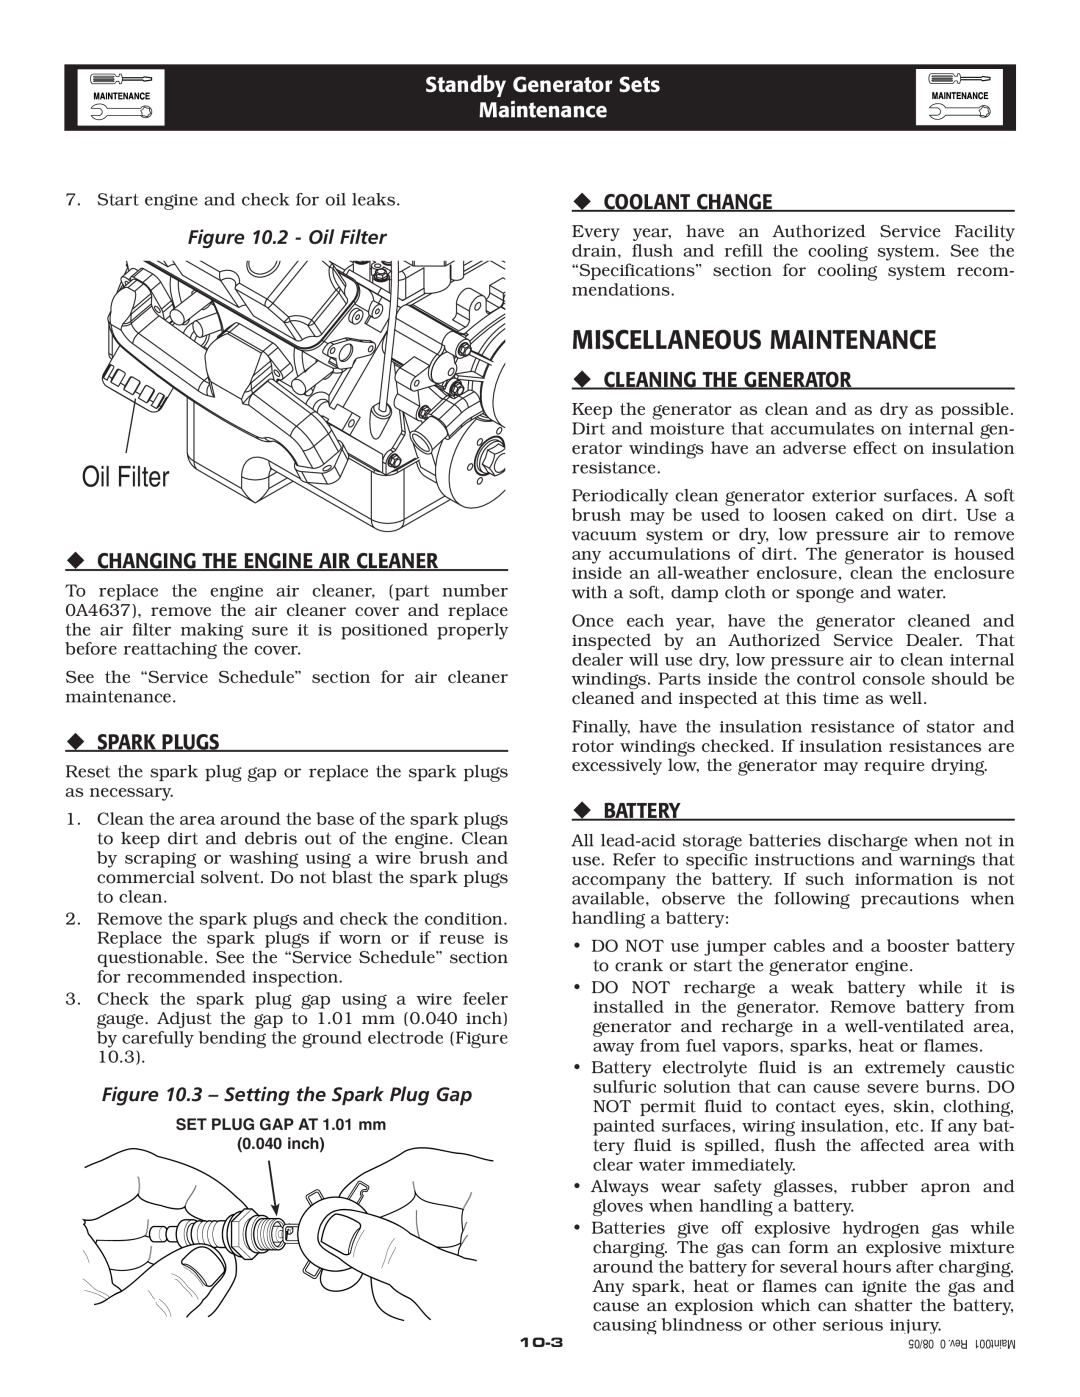 Generac Power Systems 005219-0 Miscellaneous Maintenance, ‹ Changing The Engine Air Cleaner, ‹ Spark Plugs, ‹ Battery 